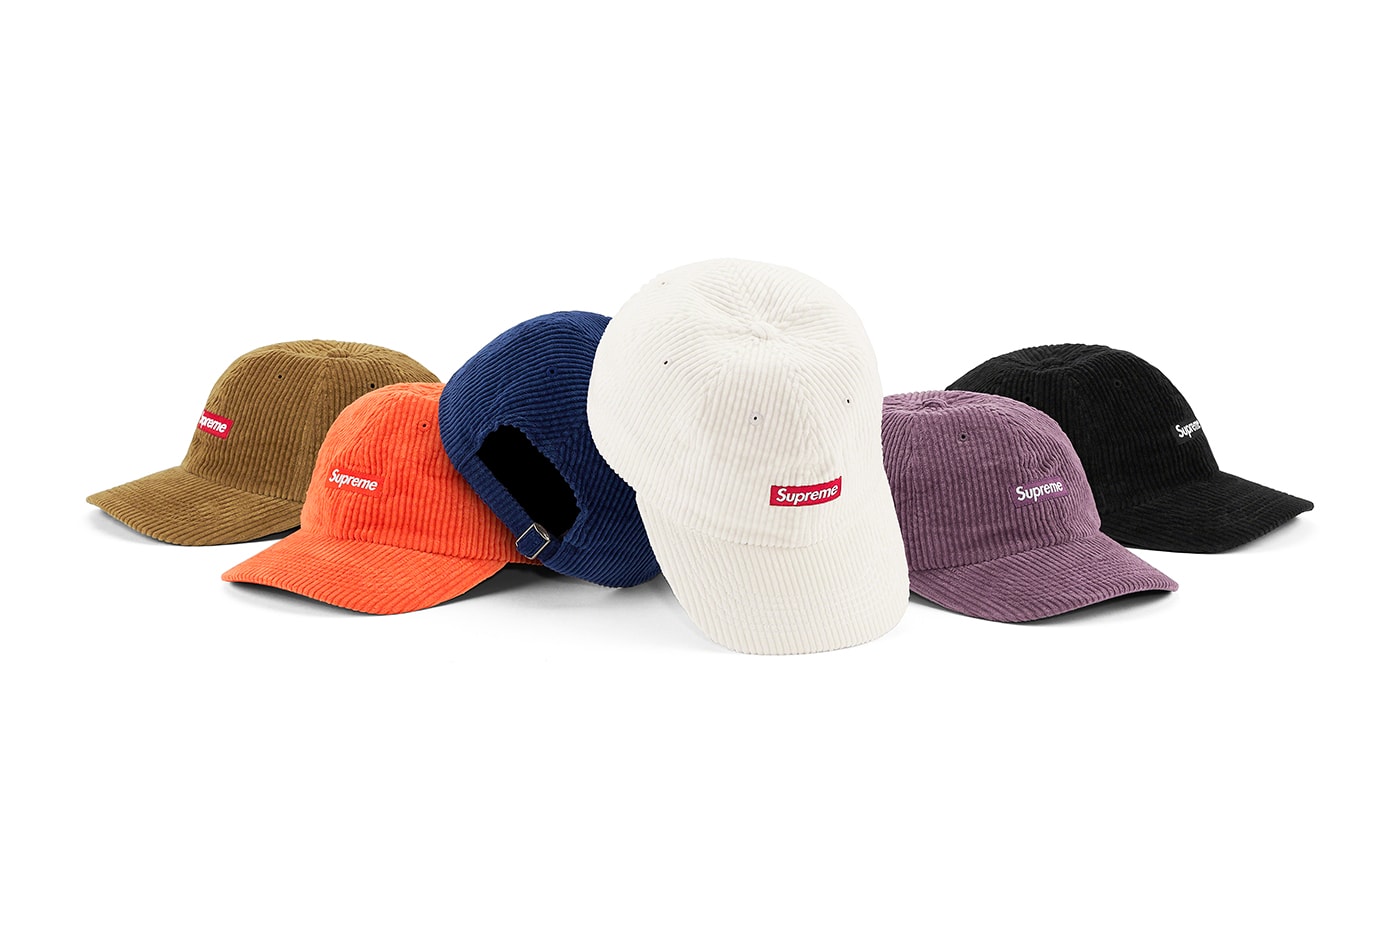 Supreme Fall/Winter 2020 Hats and Caps